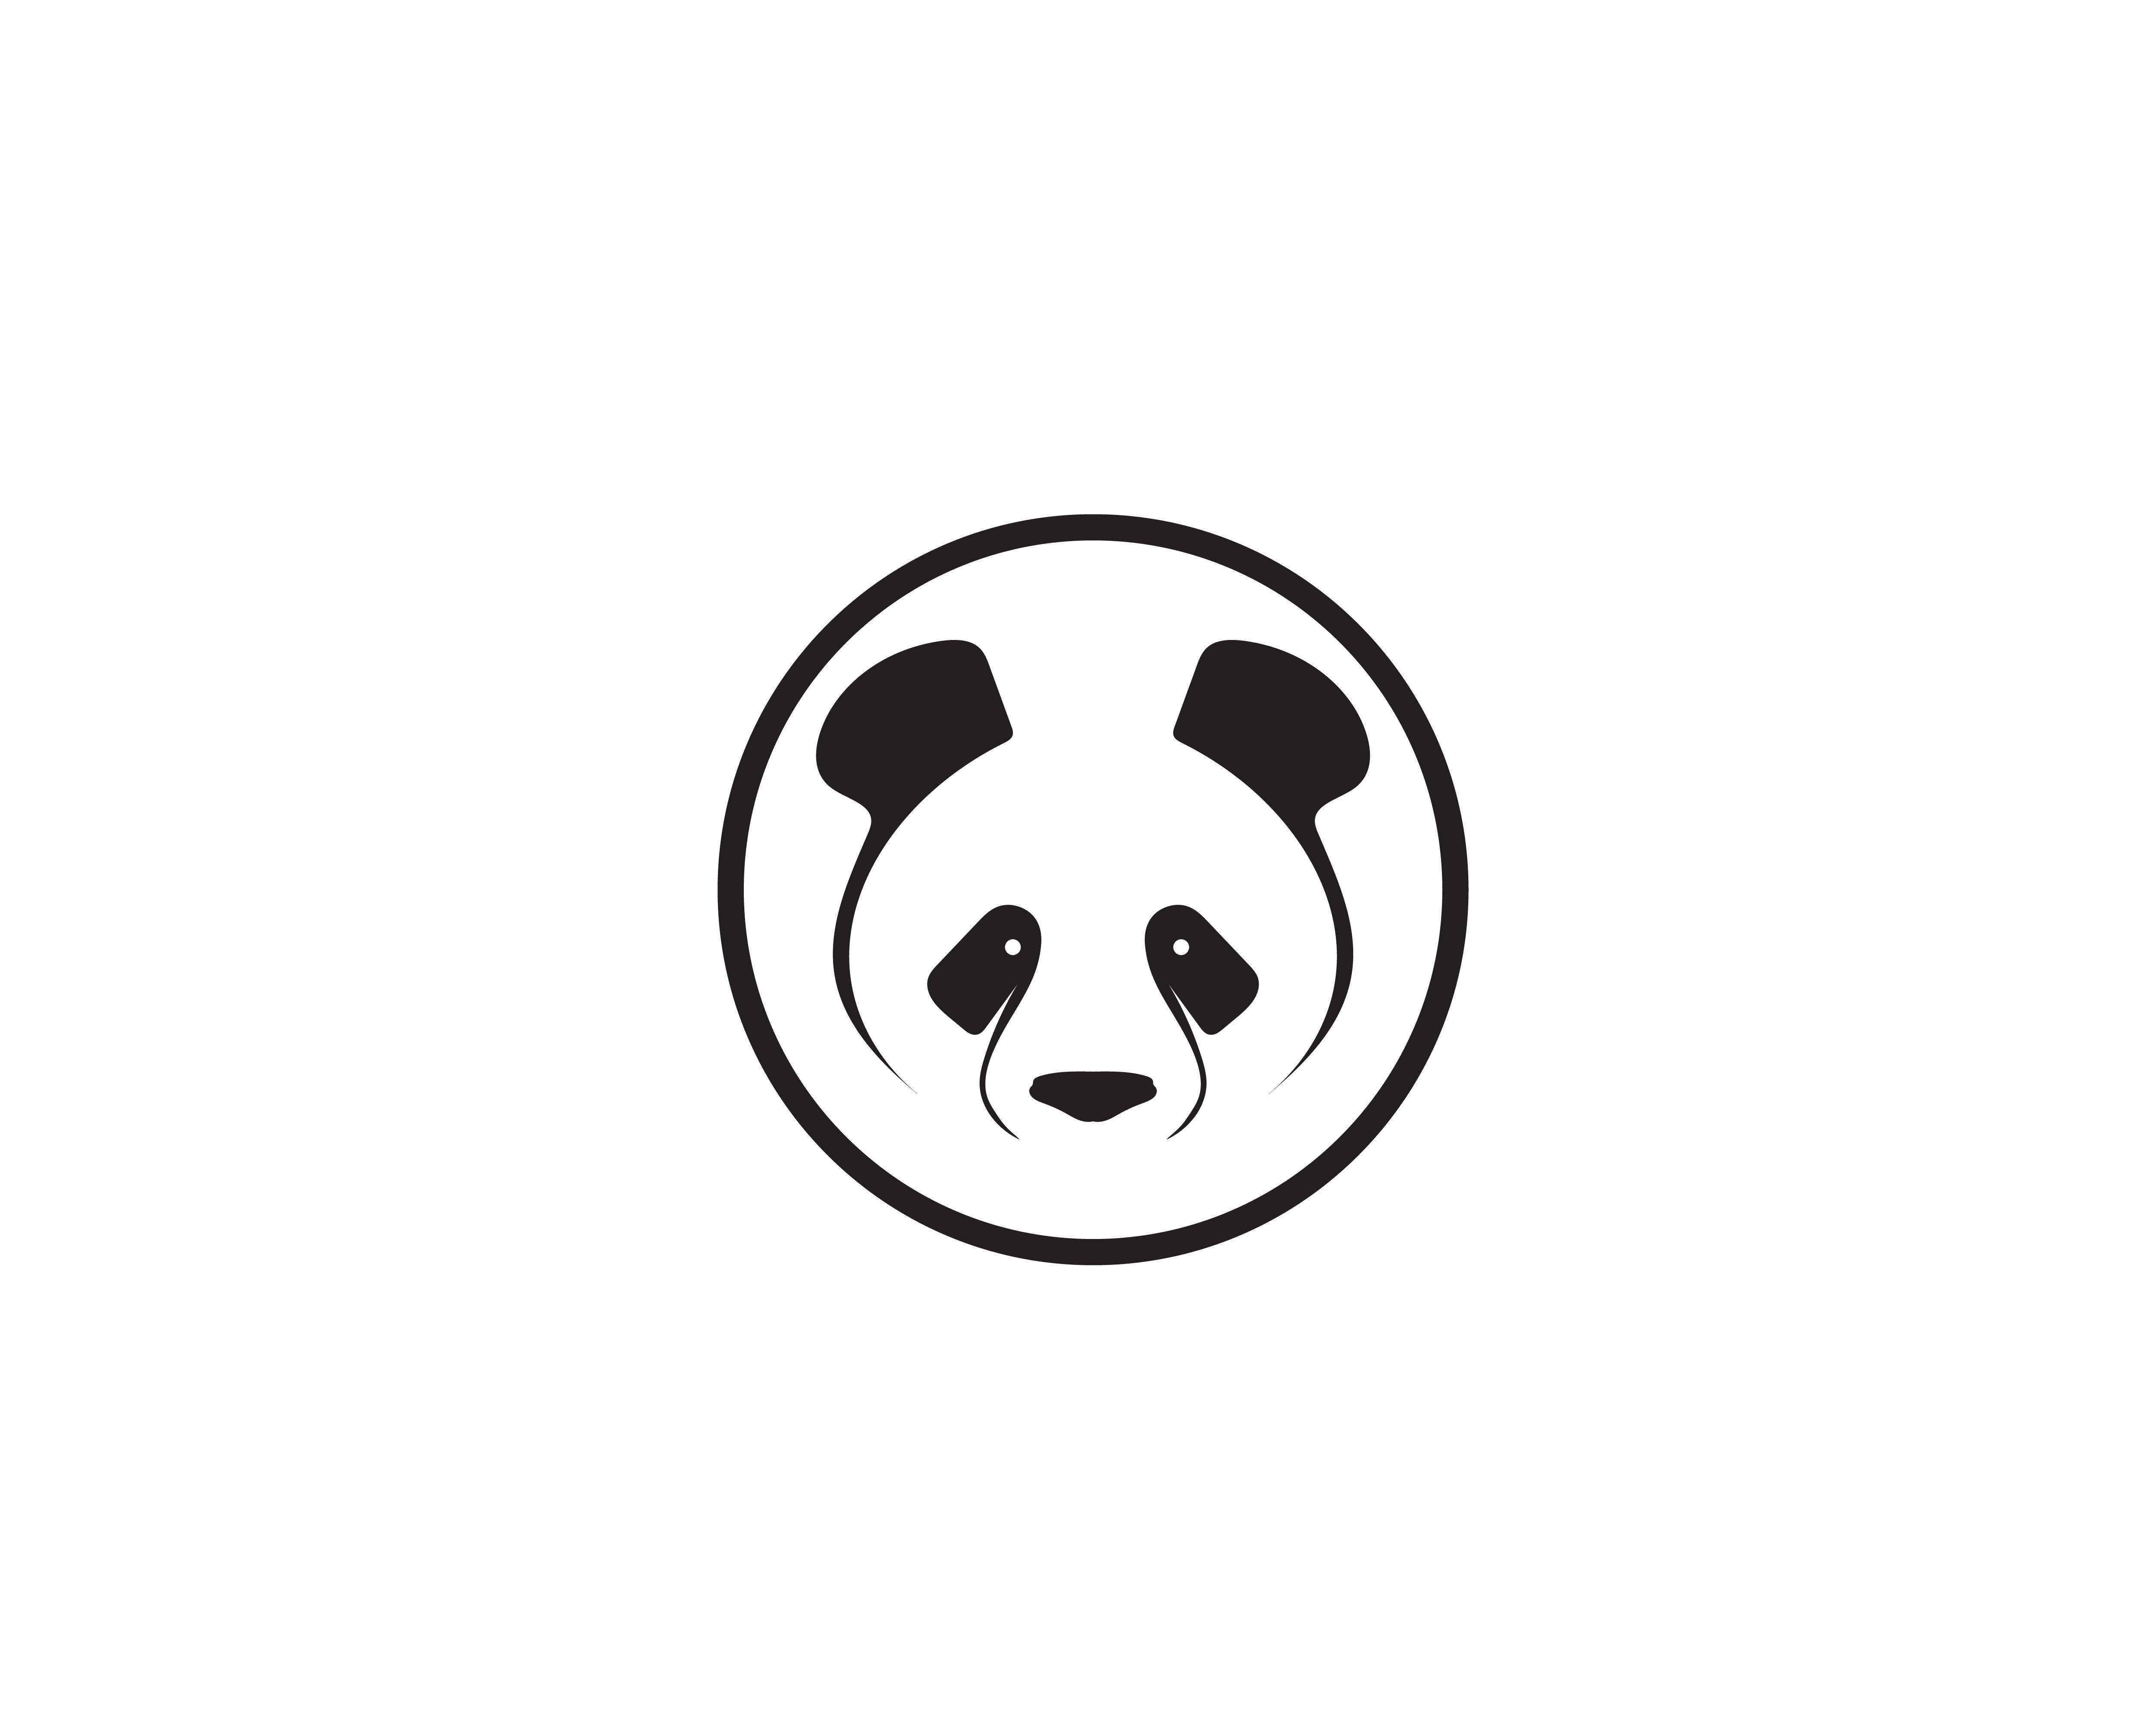 Panda Logo Vector Art Icons And Graphics For Free Download - Riset